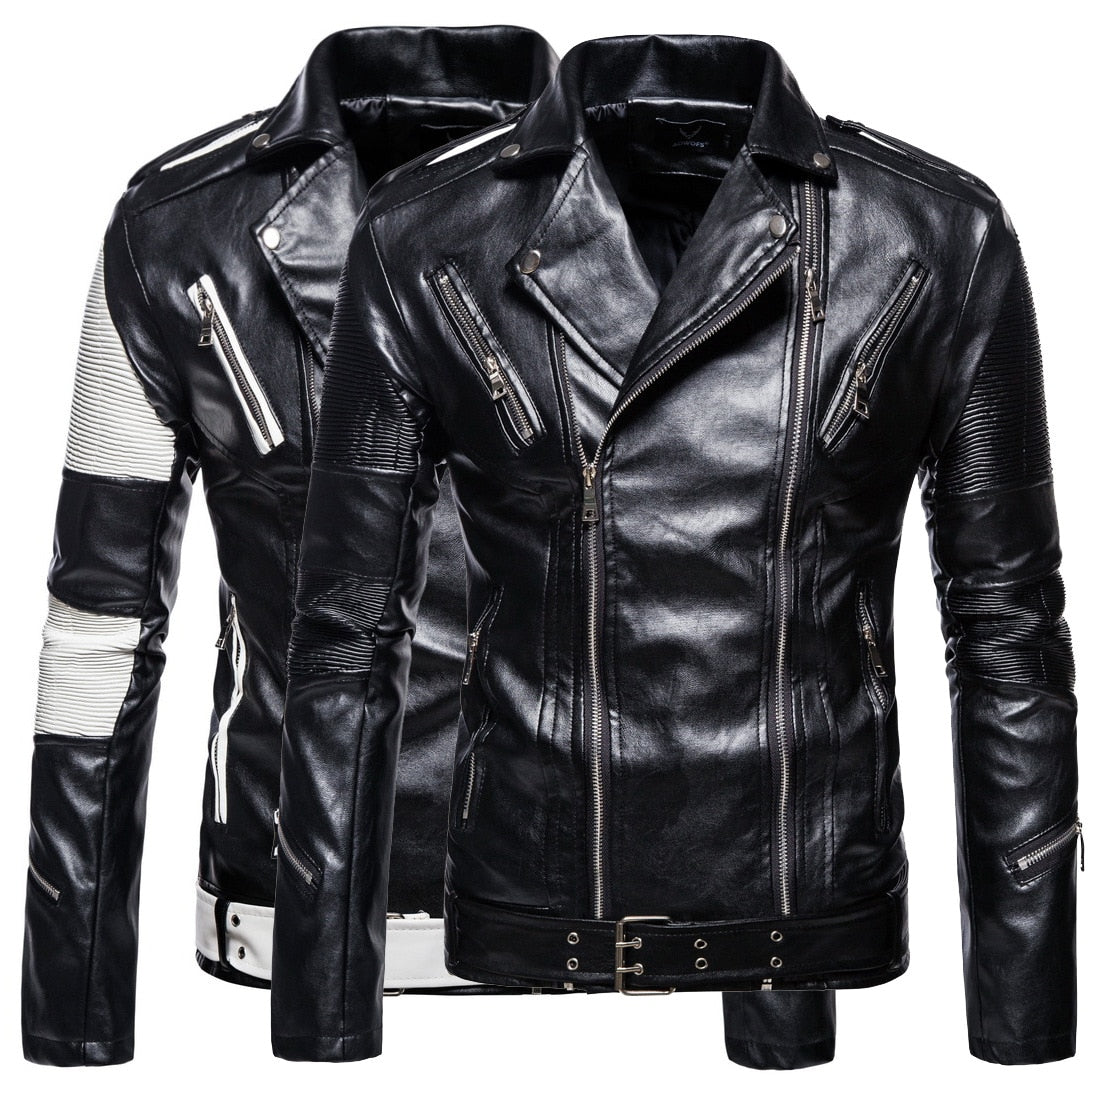 High-Quality Men's Black Leather Jackets New Slim Fit PU Leather Coats - Acapparelstore